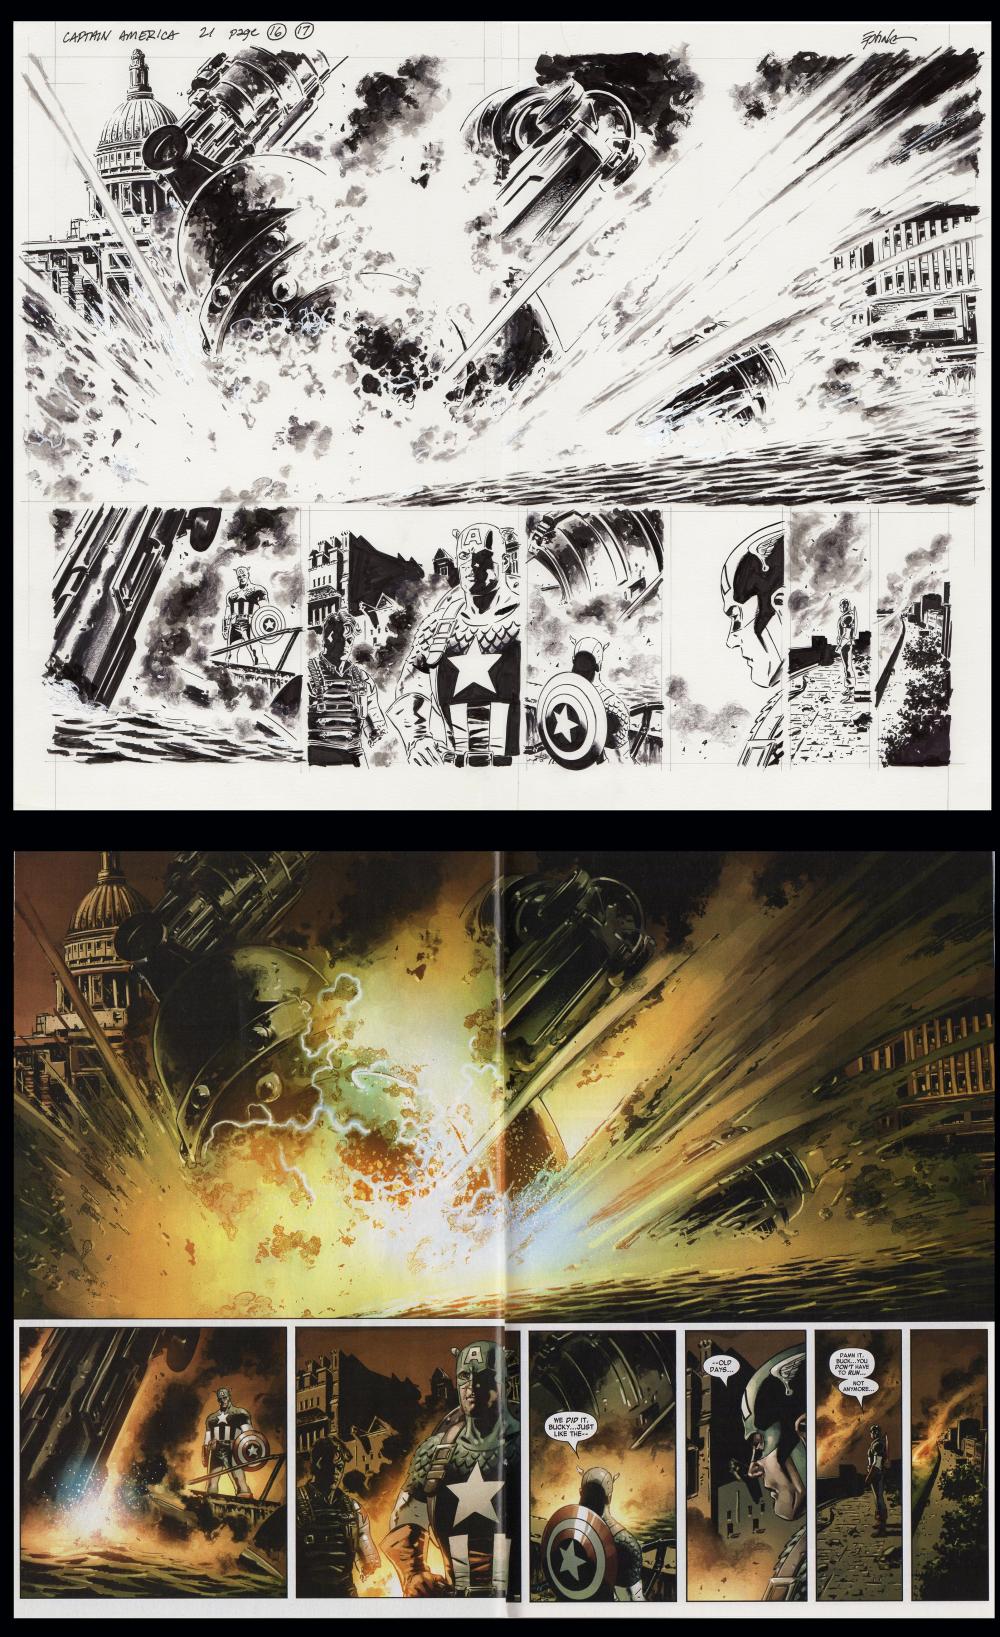 Image: Captain America Vol 5 #21 pages 16-17 Double page spread art by Steve Epting